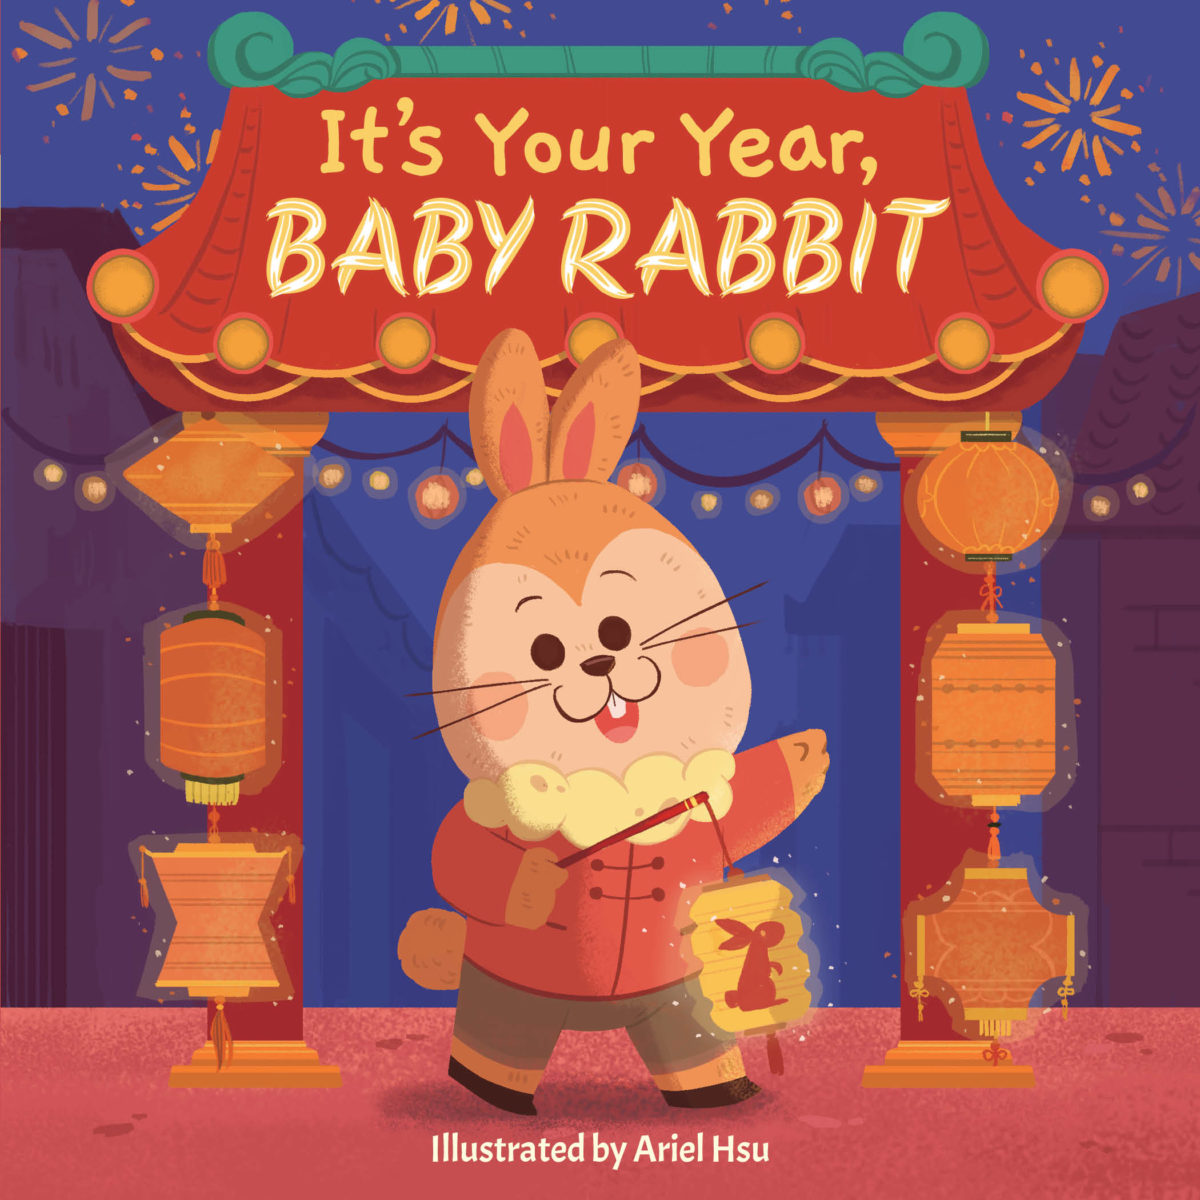 It’s Your Year, Baby Rabbit